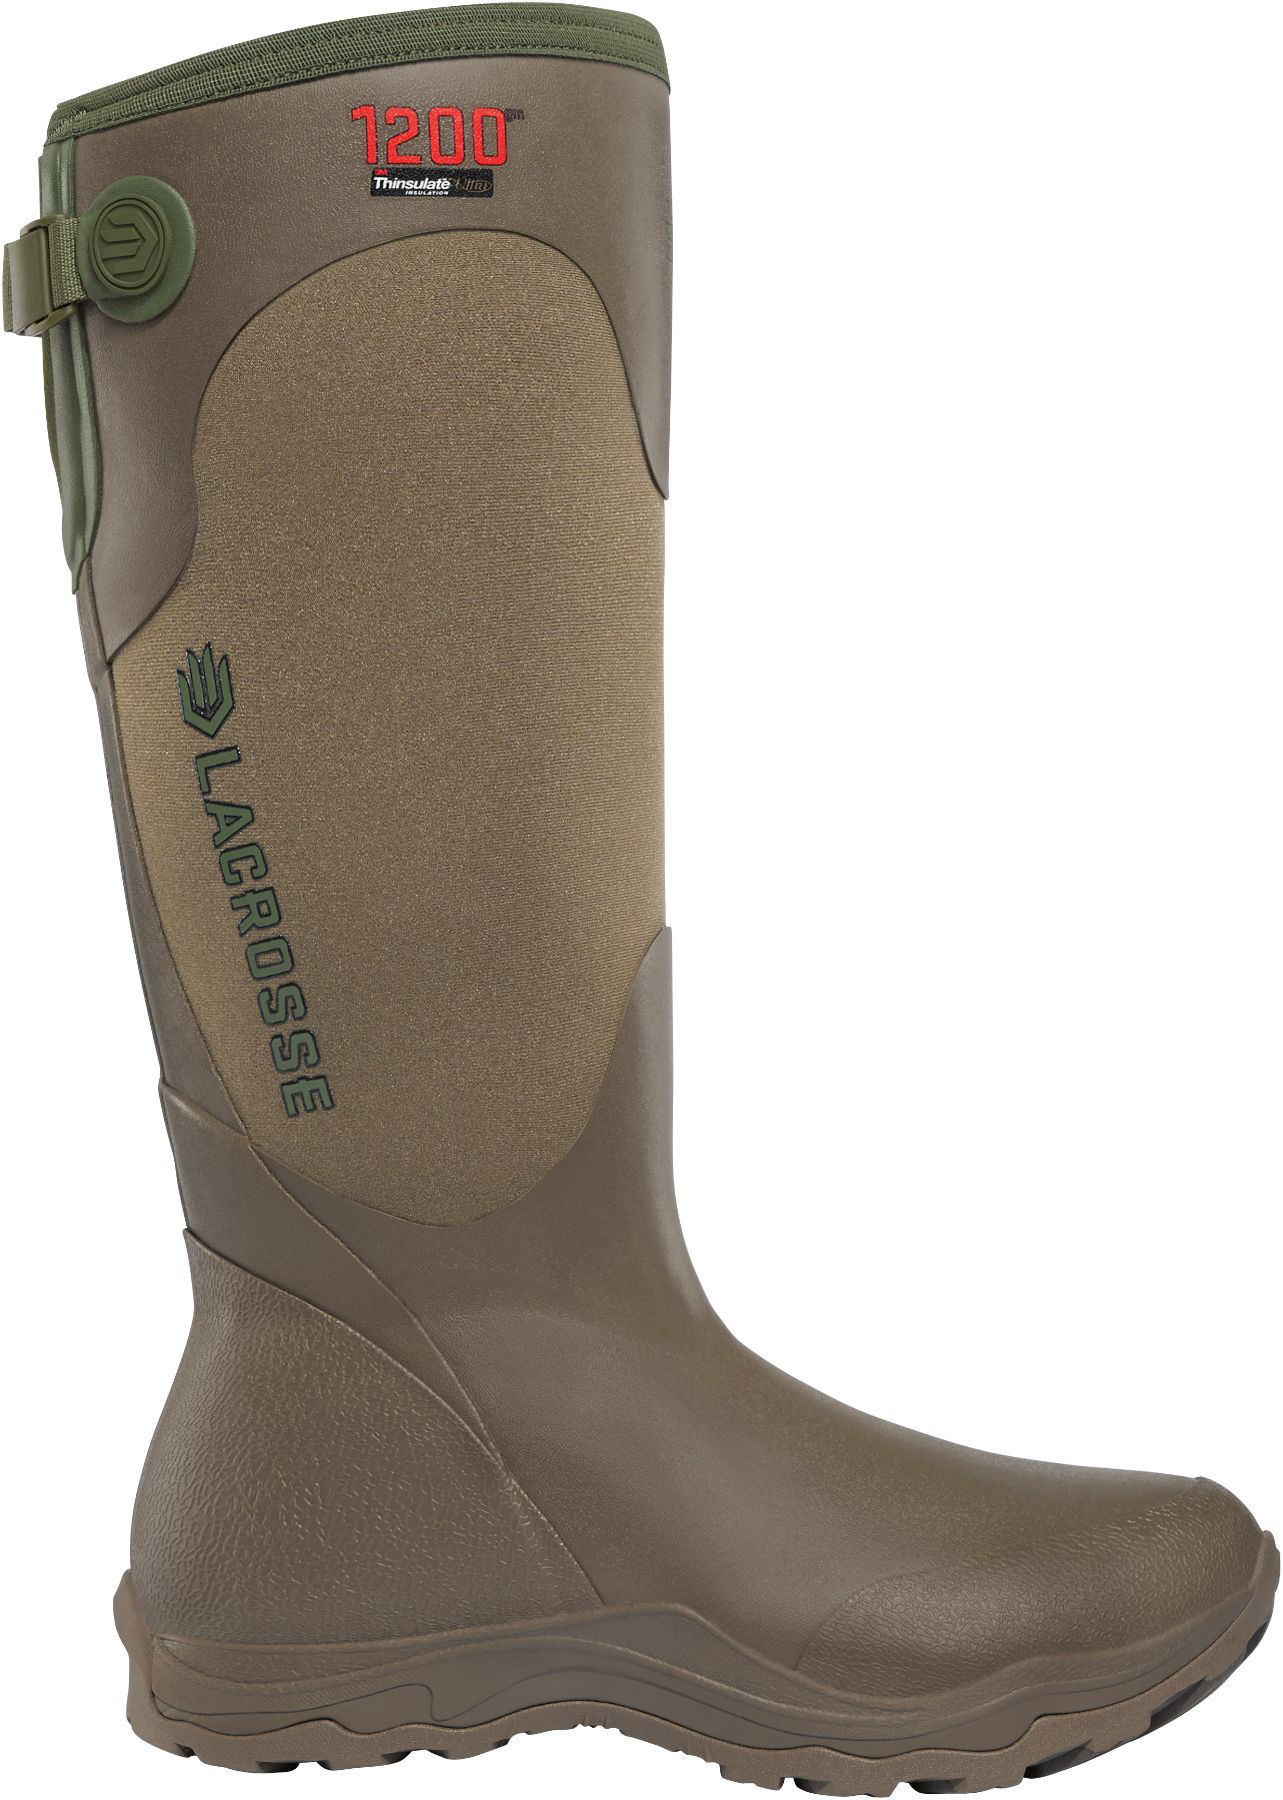 LaCrosse Alpha Agility 1200 Insulated Waterproof Hunting Boots for Ladies - Brown/Green - 9M